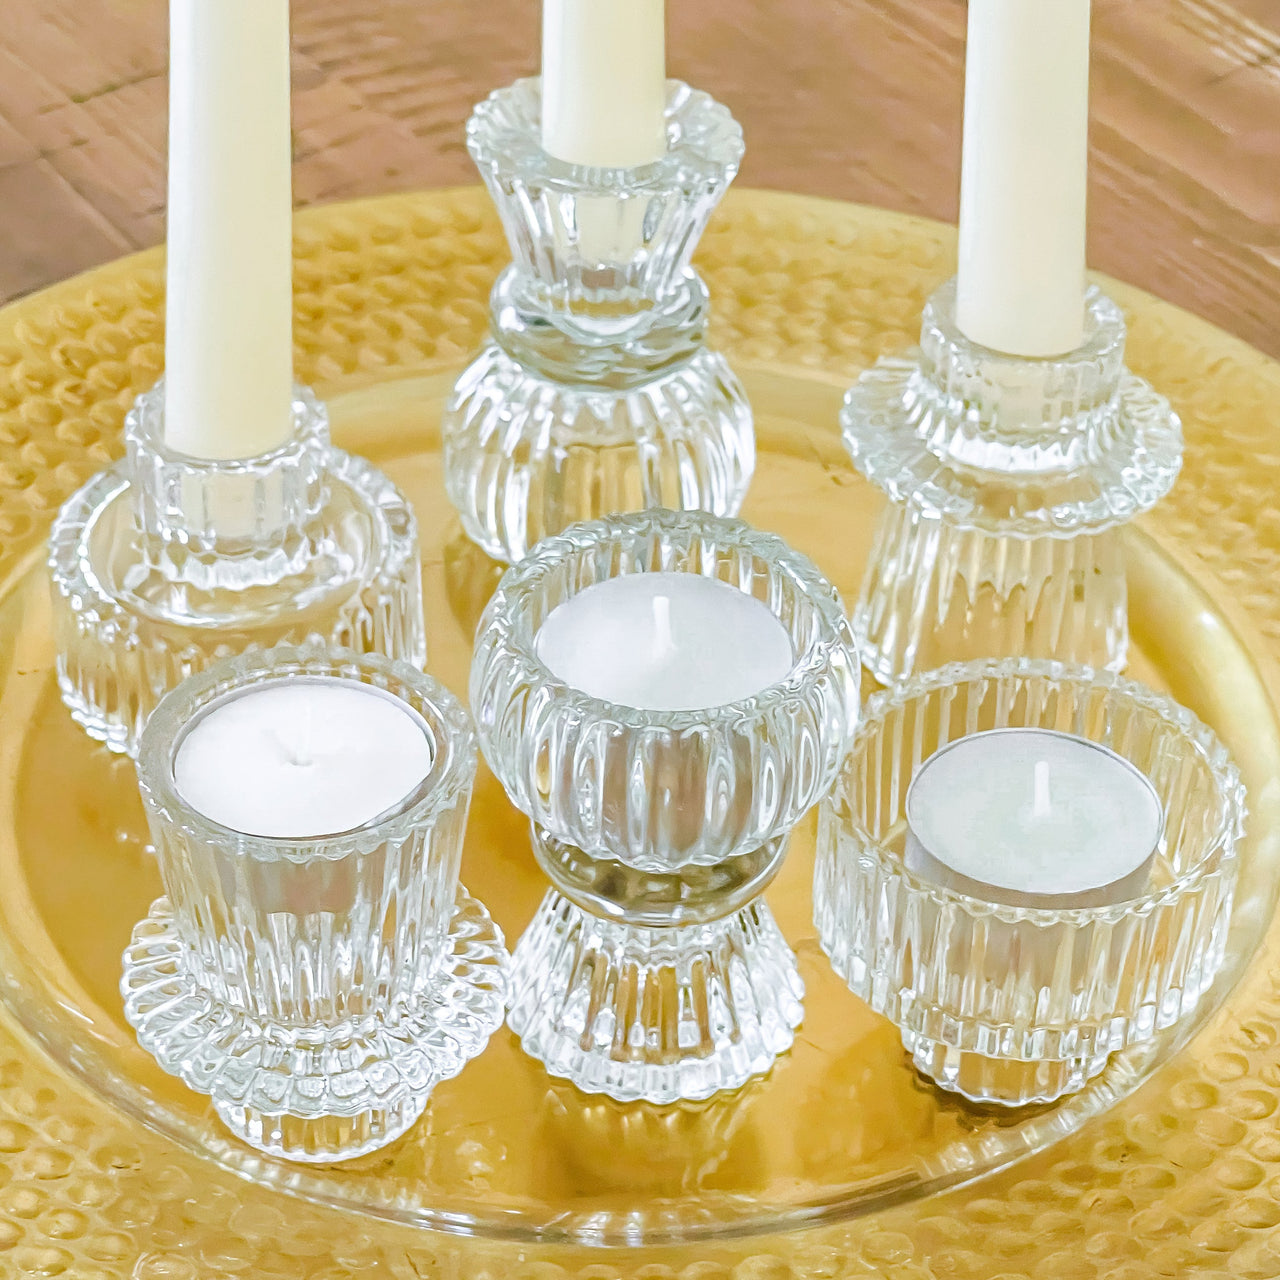 Vintage Ribbed Glass Clear Candle/Candlestick Holders Set of 6 - Assorted | Main Image, My Wedding Favors | Tealight/Votive Holder